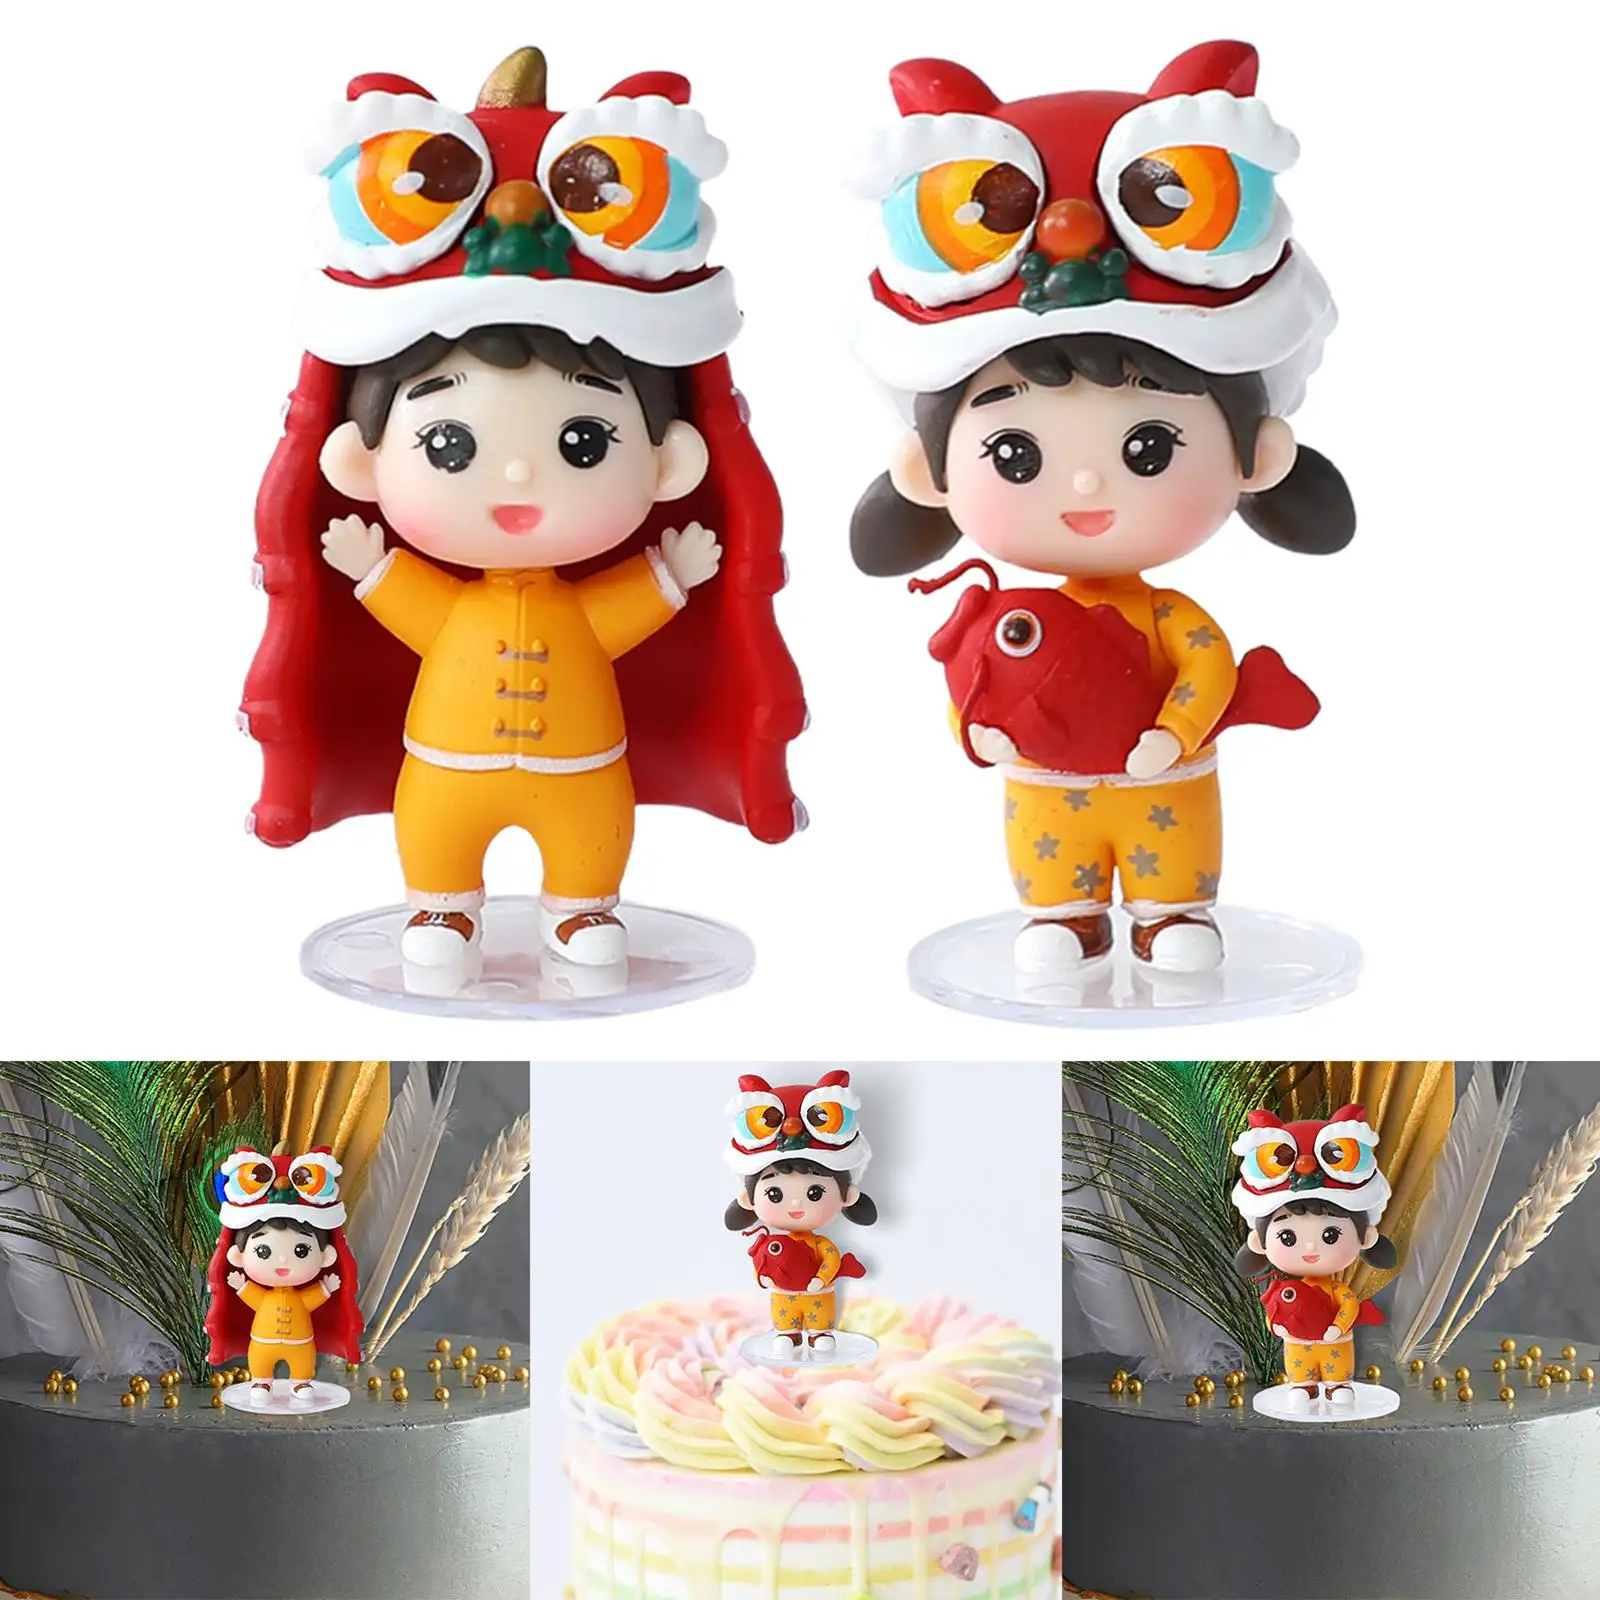 Cute Chinese Doll Figurine Miniature Doll Figures Doll Statue Collection for Bedroom Desktop Home Decoration Cake Topper Decor